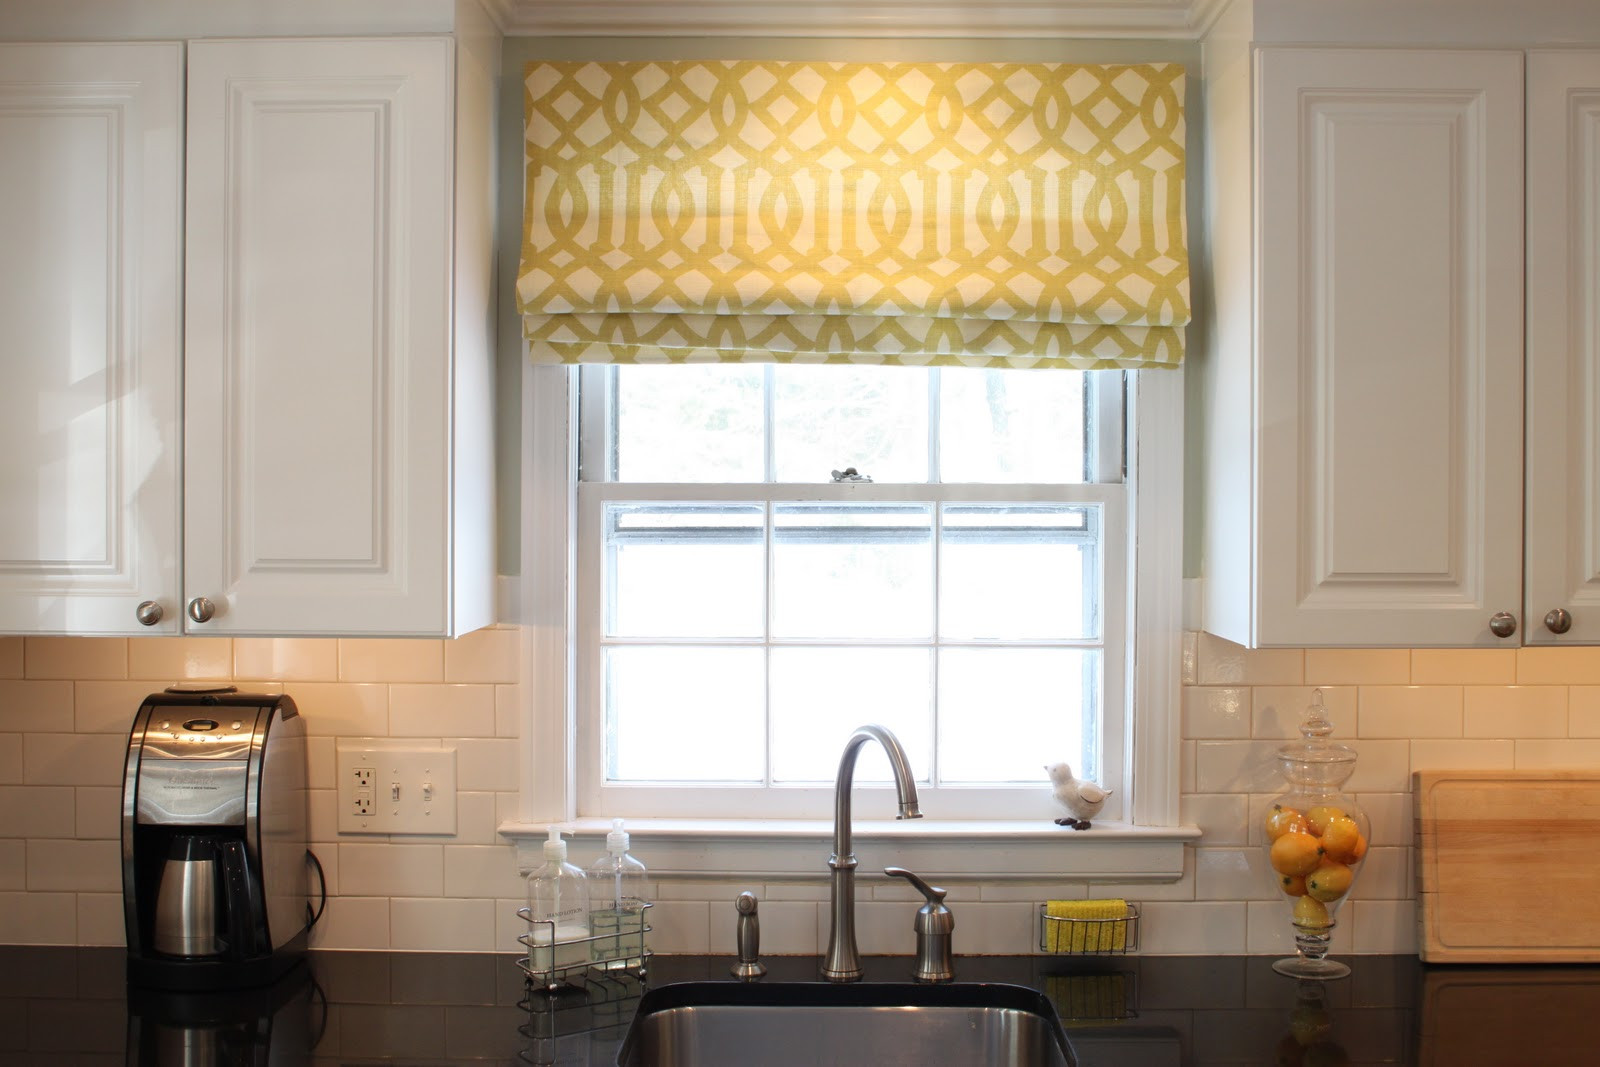 Kitchen Door Window Curtains
 Here Are Some Ideas For Your Kitchen Window Treatments